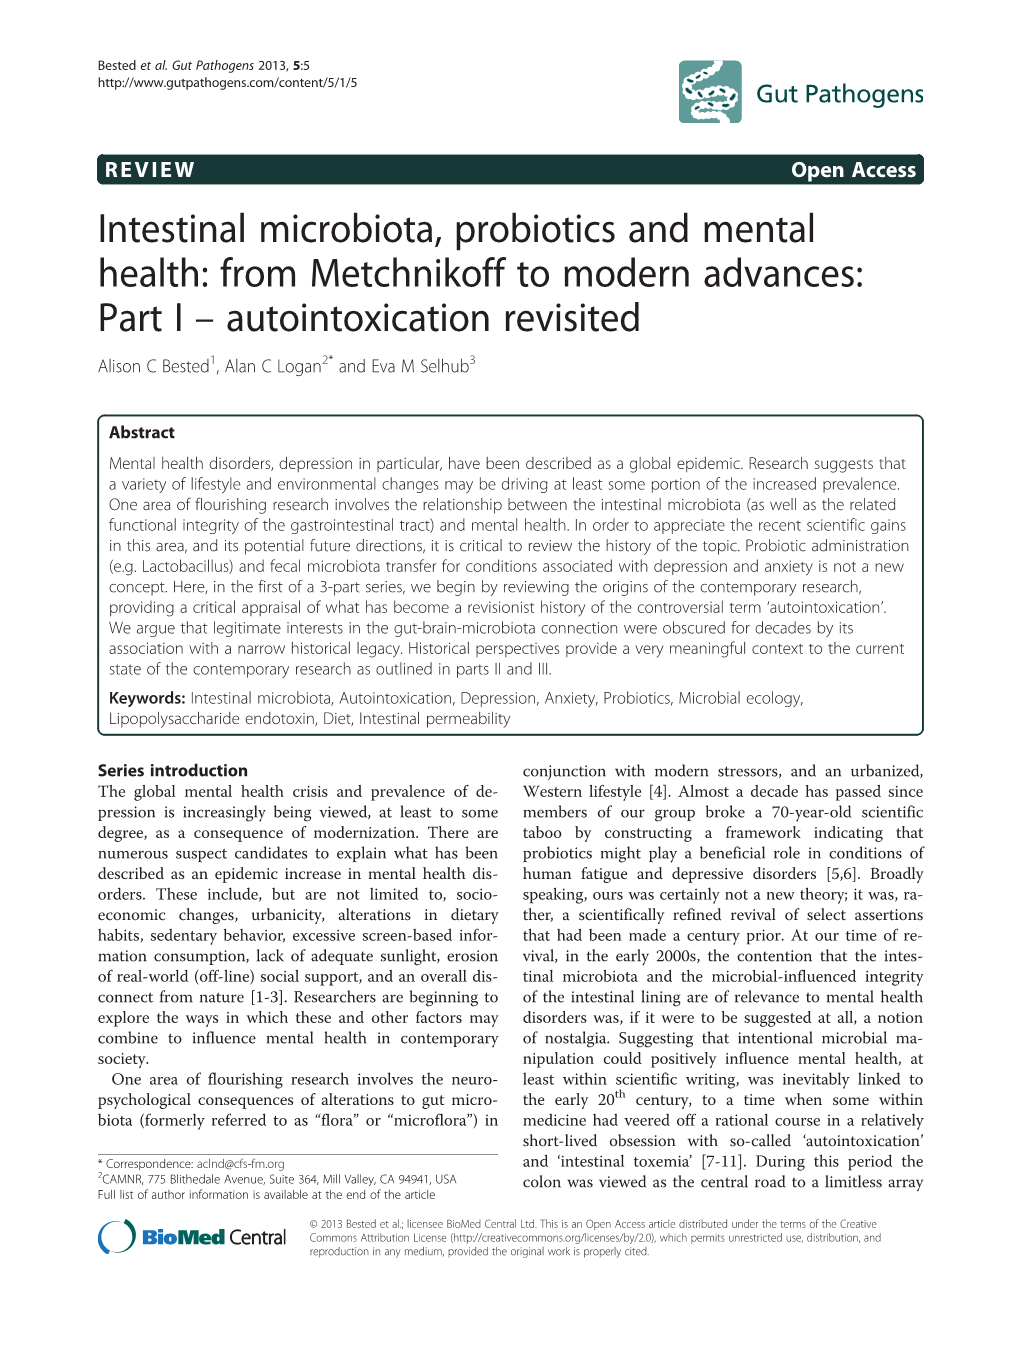 Intestinal Microbiota, Probiotics and Mental Health: from Metchnikoff To